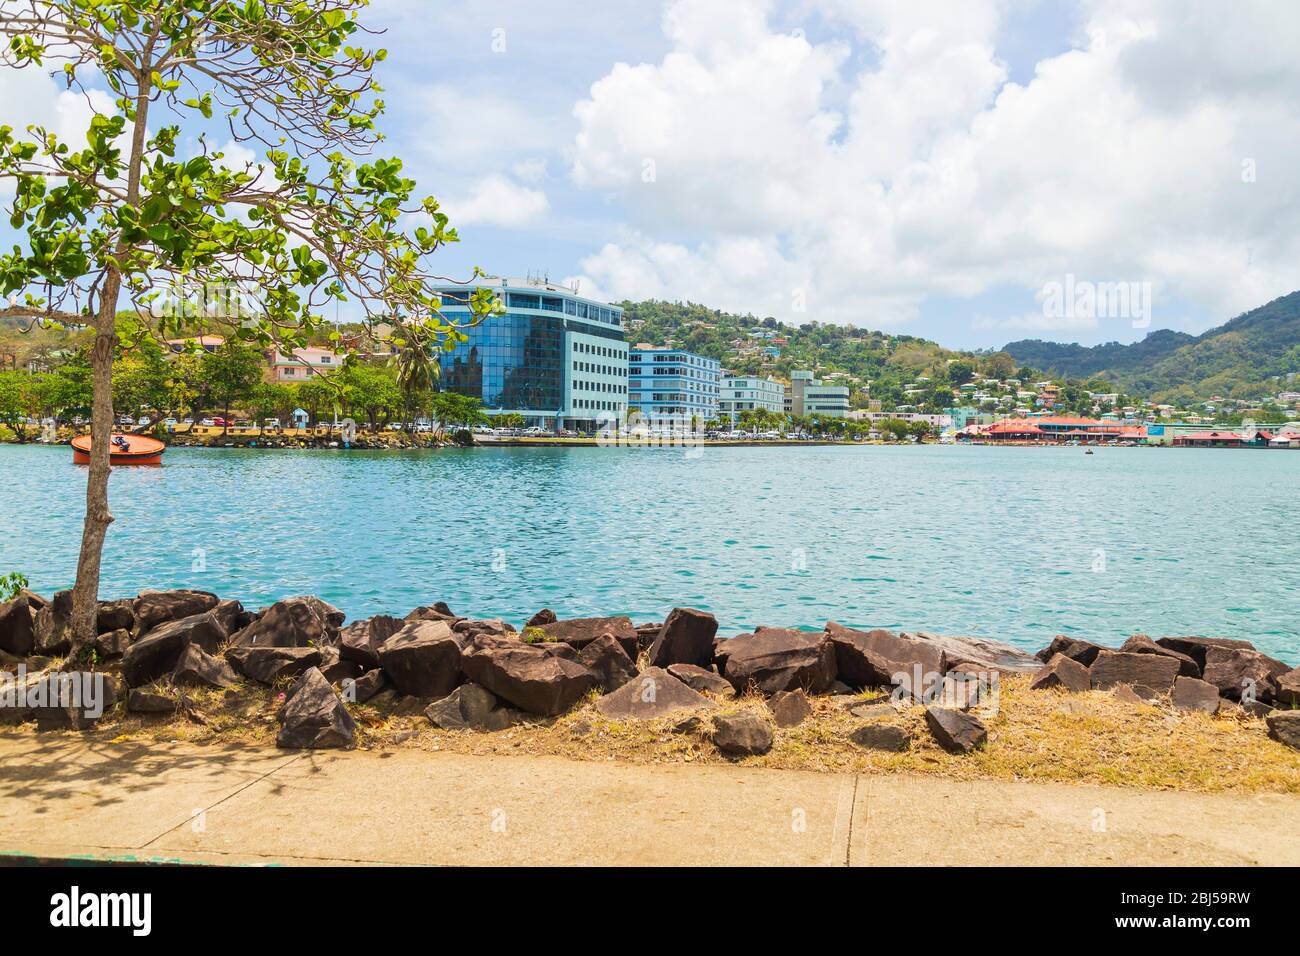 Castries, Saint Lucia - April 15 2020: the water of the Castries harbor between rocks on the near side and hills and buildings in the background Stock Photo